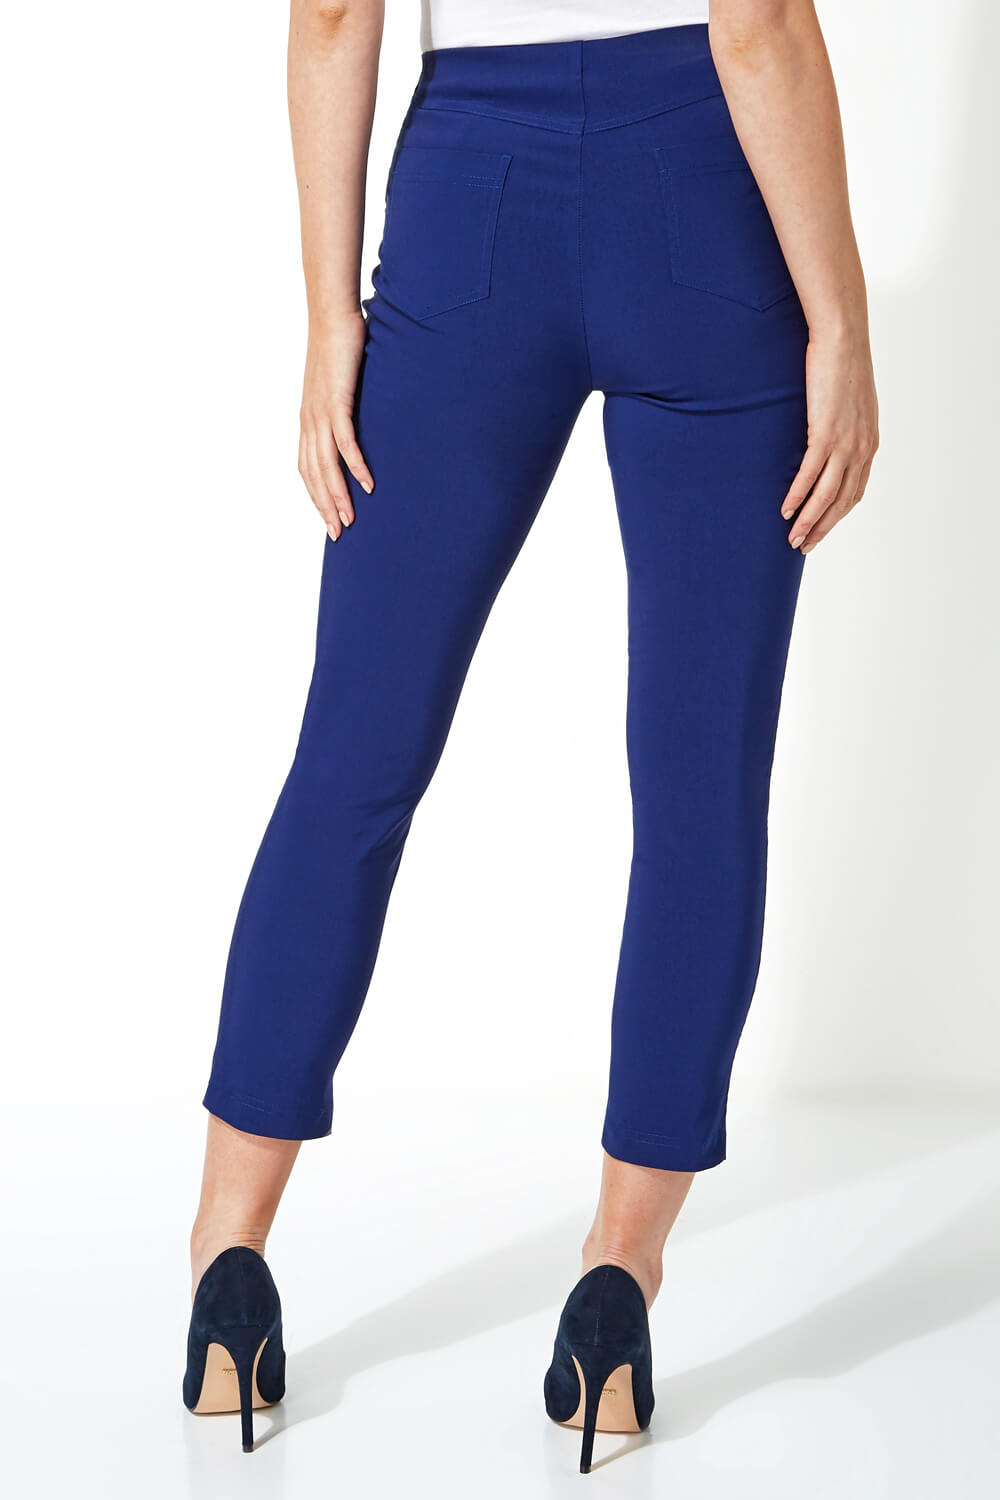 Midnight Blue 3/4 Length Stretch Trouser, Image 2 of 5